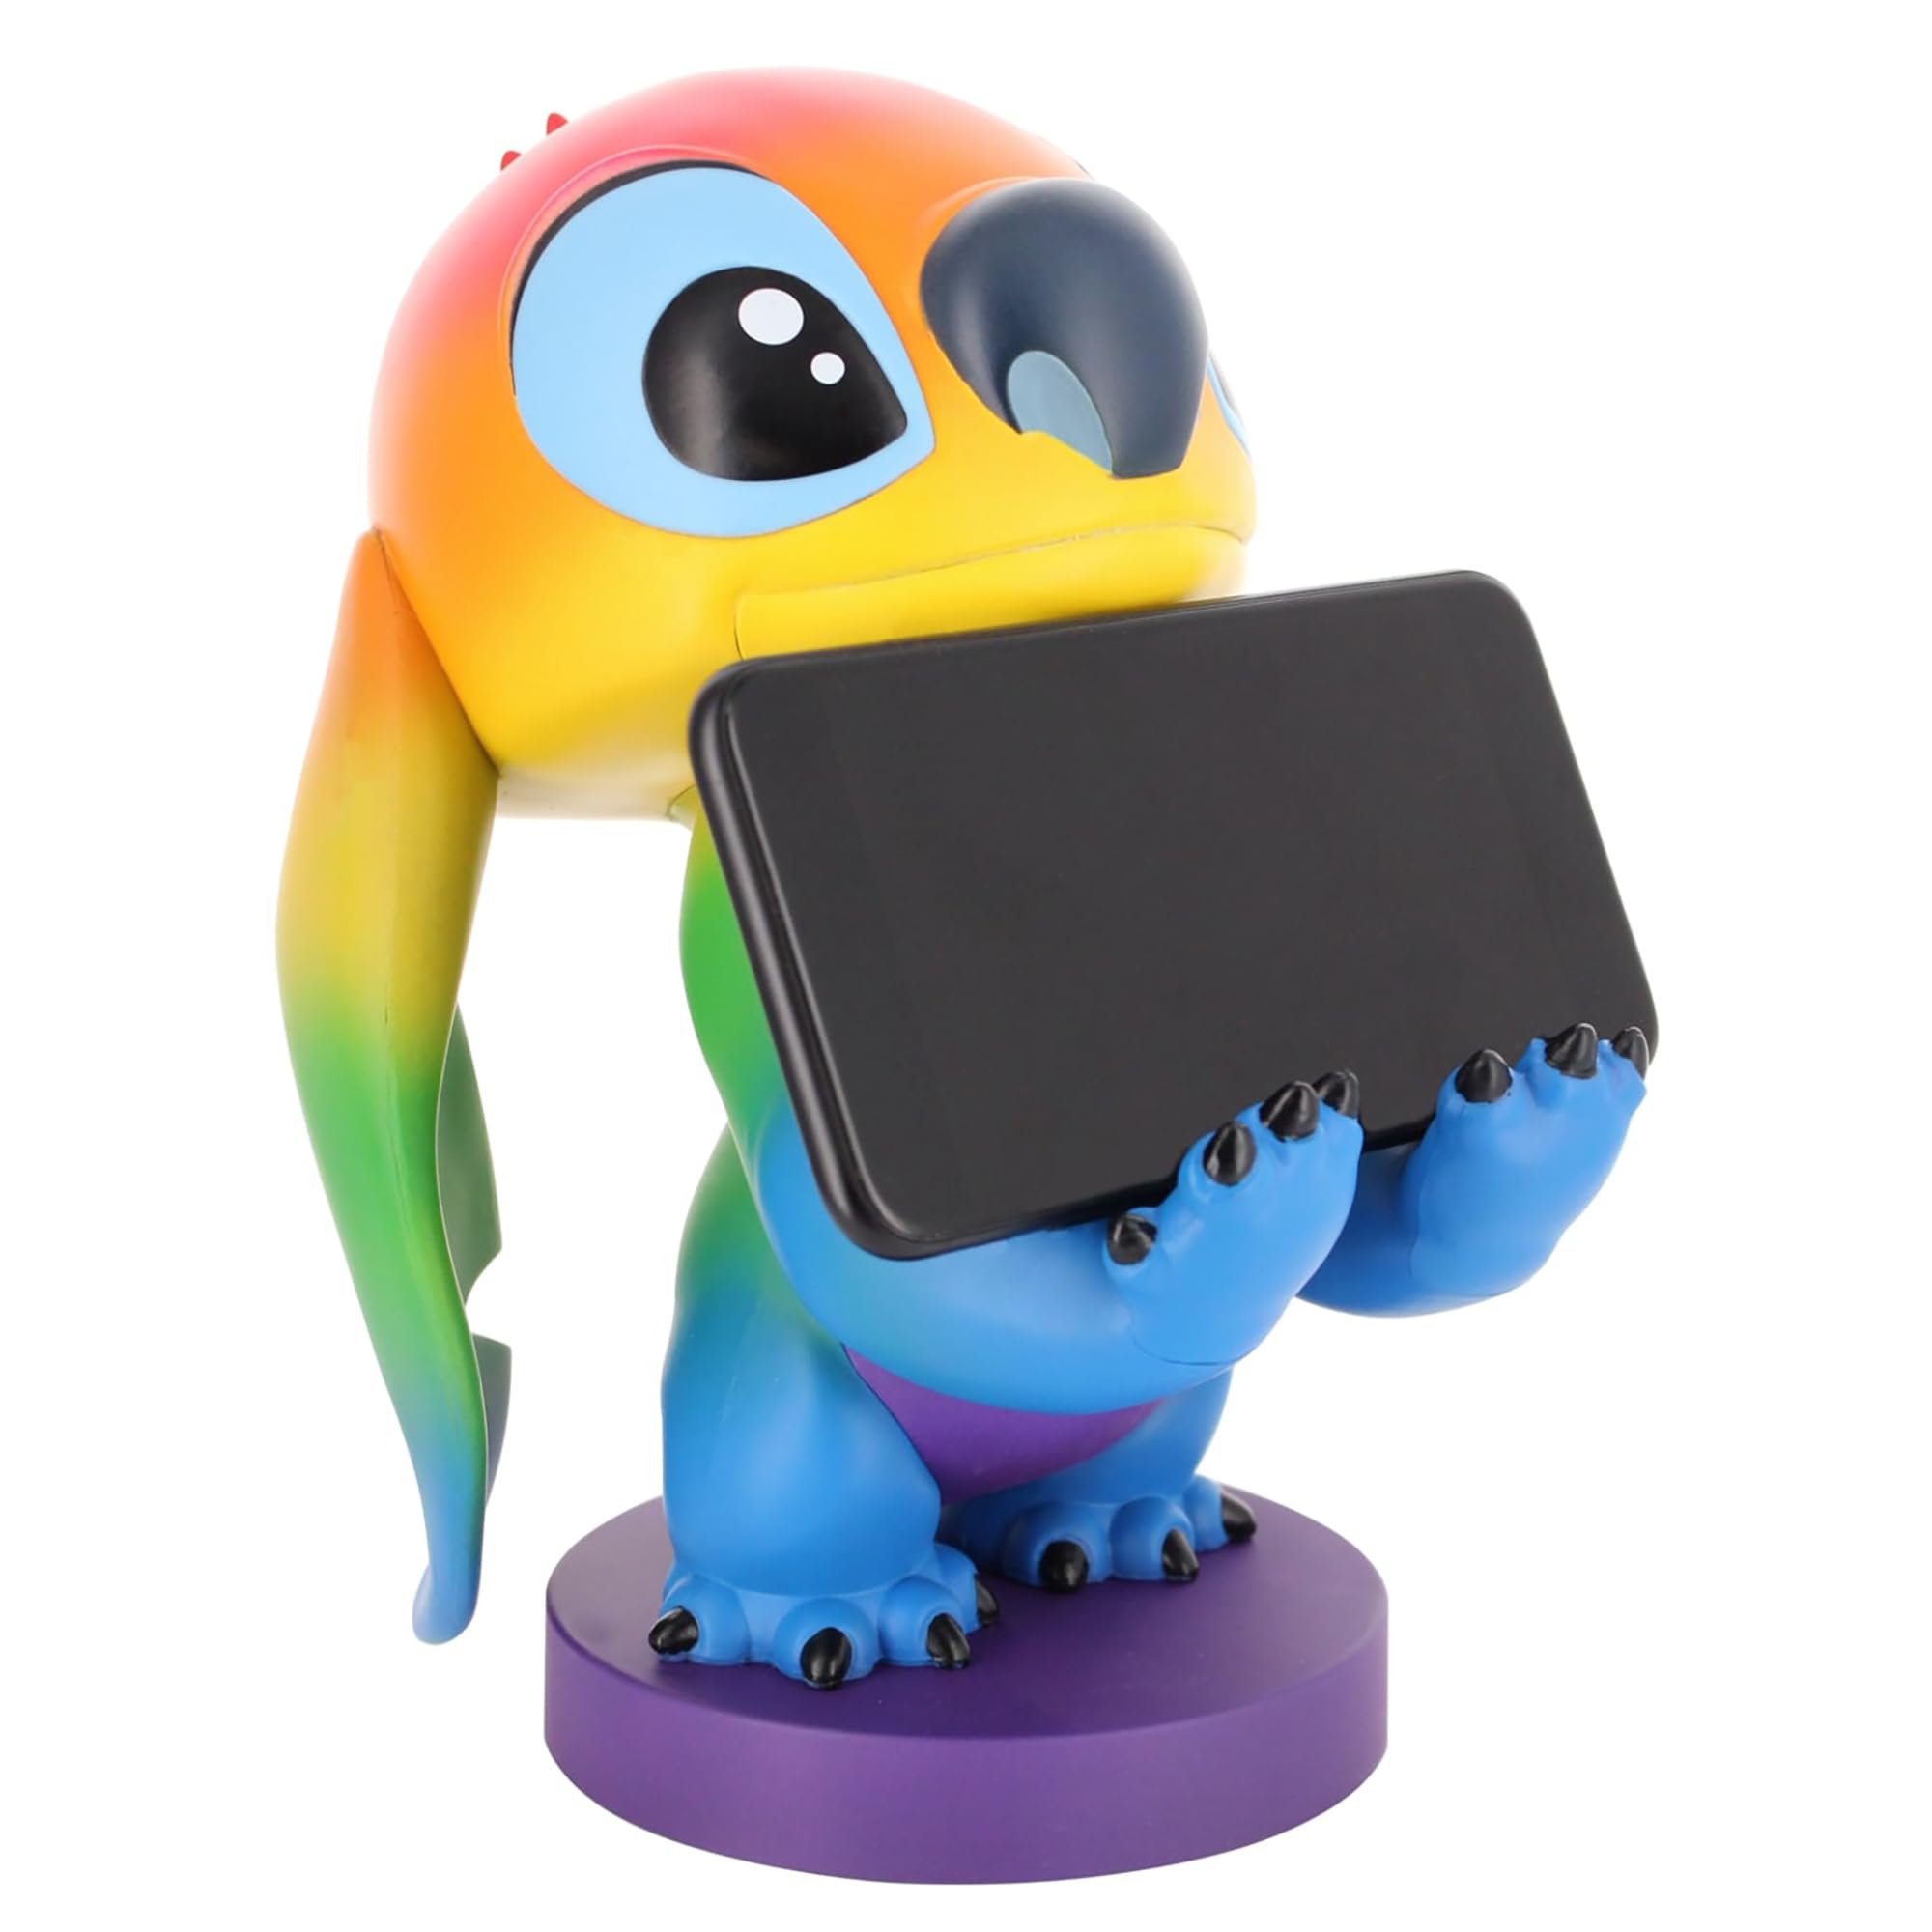 Exquisite Gaming Cable Guys: Lilo & Stitch Rainbow Stitch Mobile Phone & Gaming Controller Holder - Disney Figure